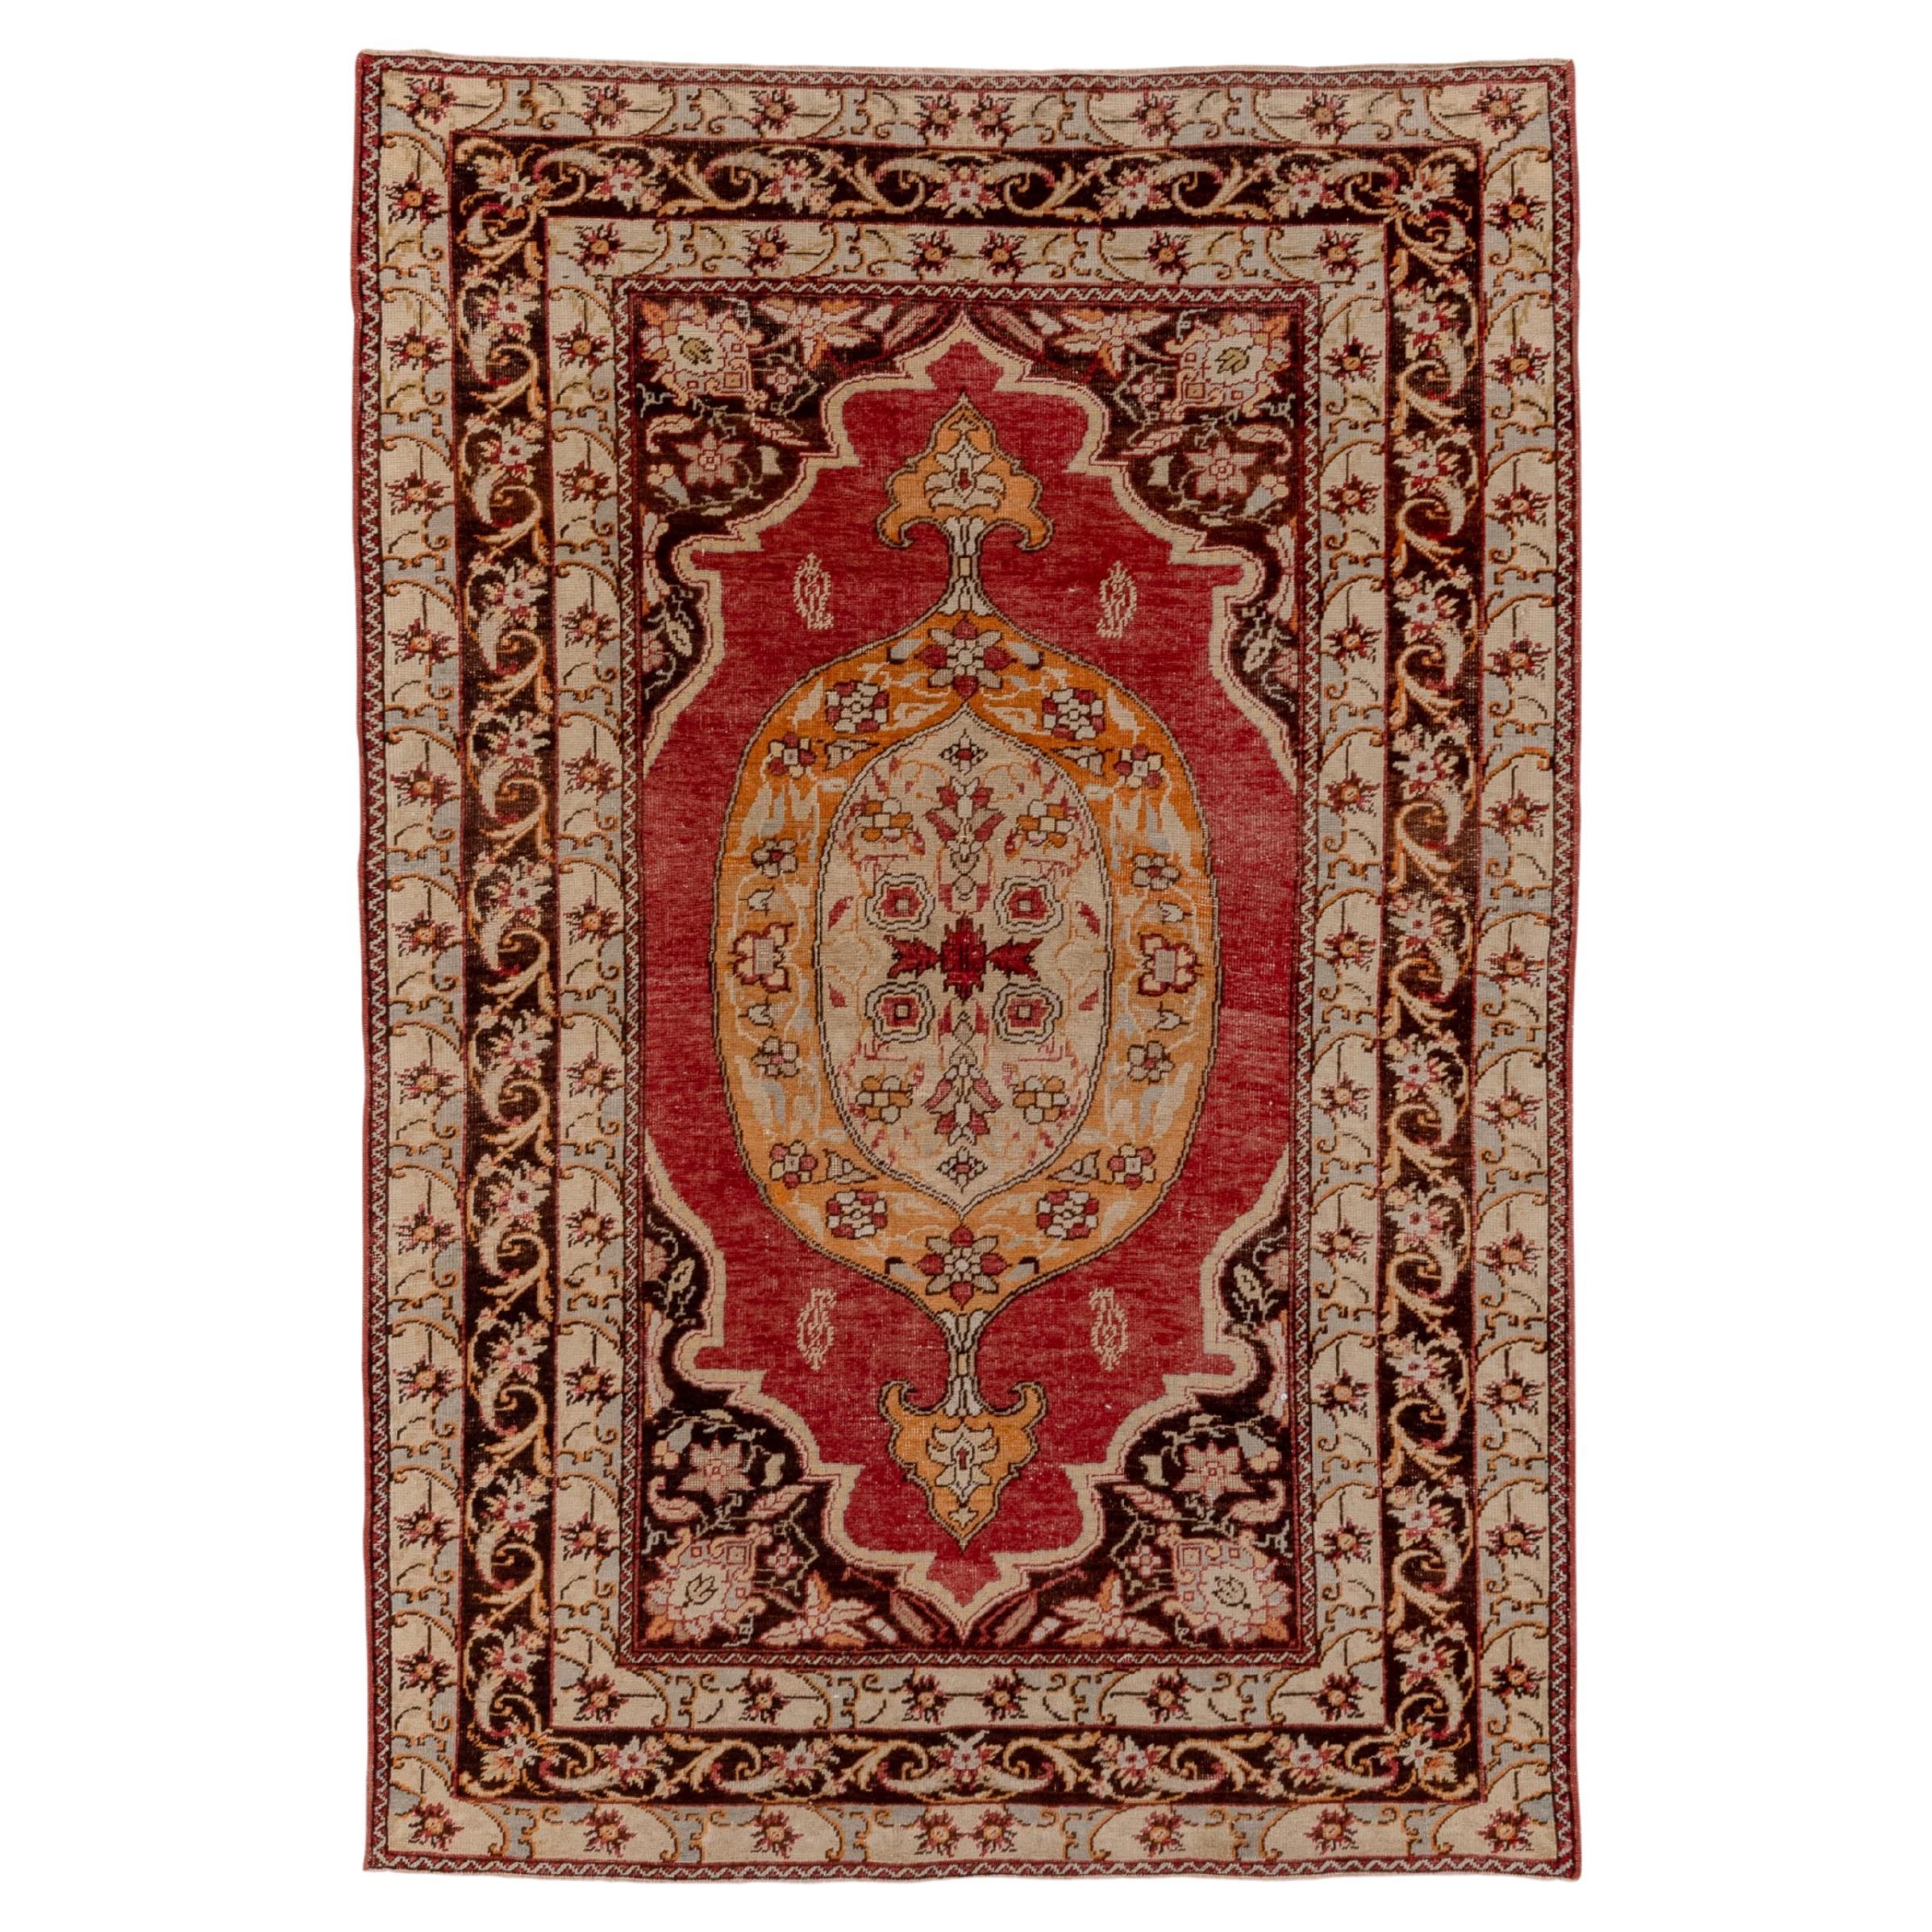 Turkish Oushak in Ivory and Red